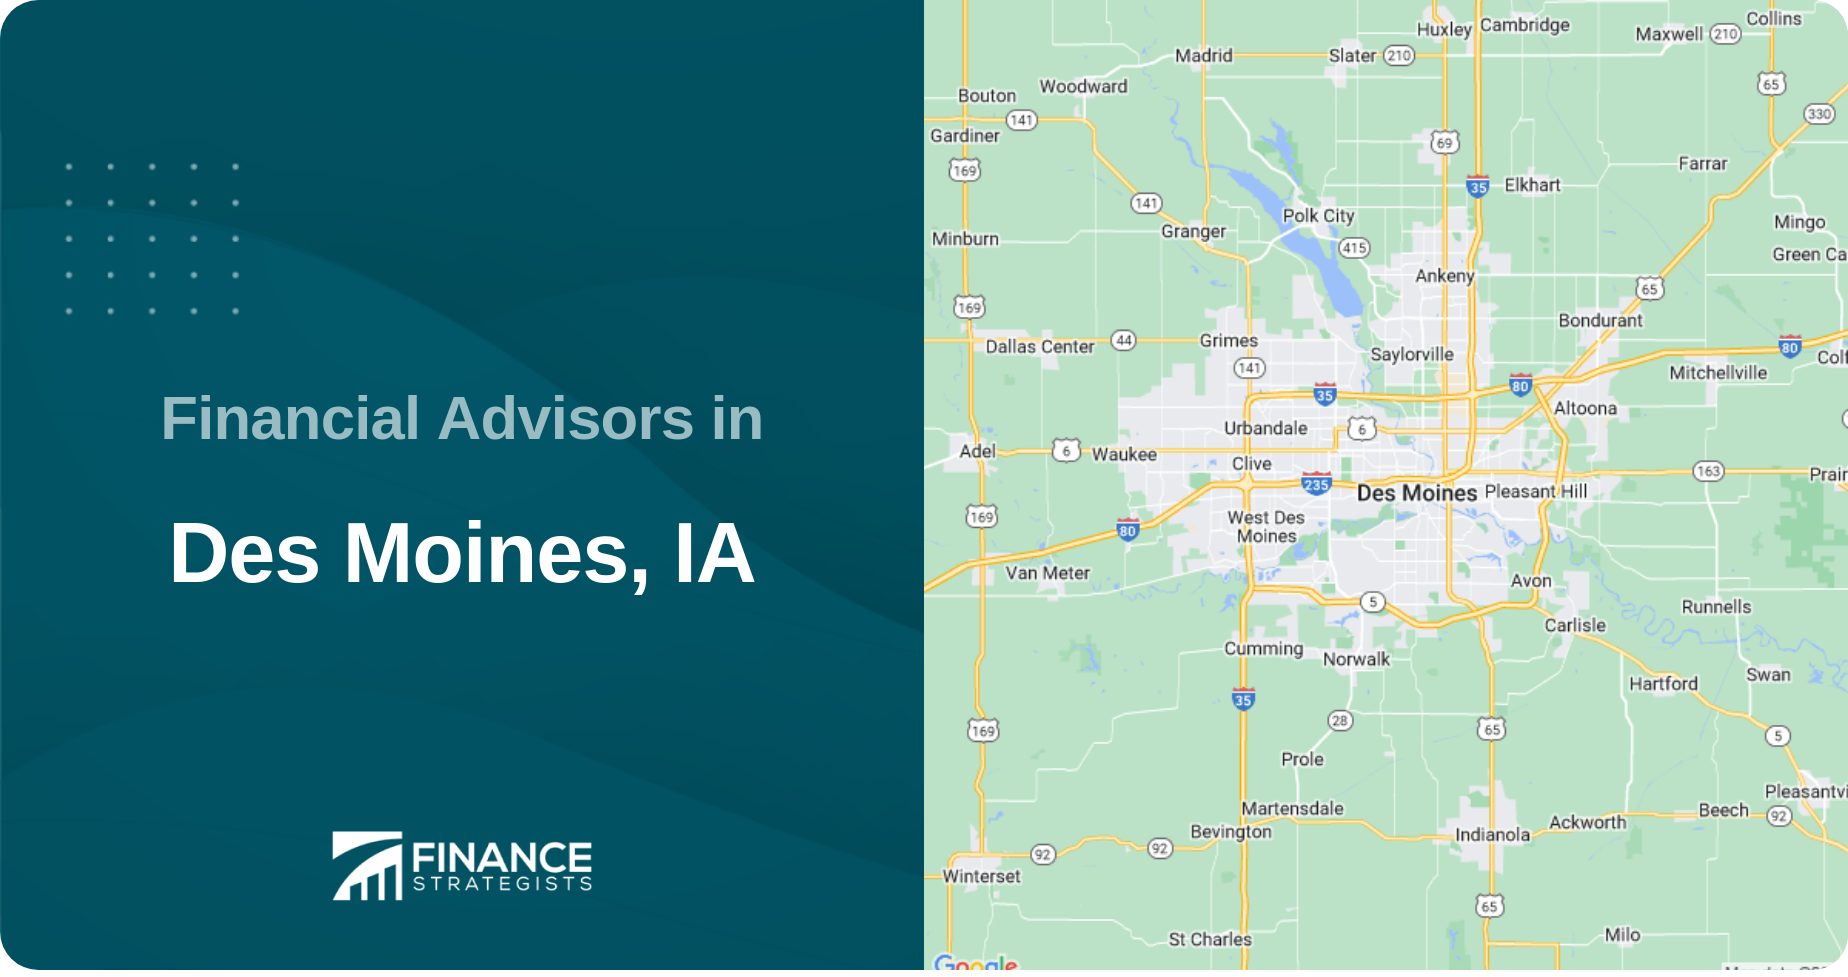 Financial Advisors in Des Moines, IA